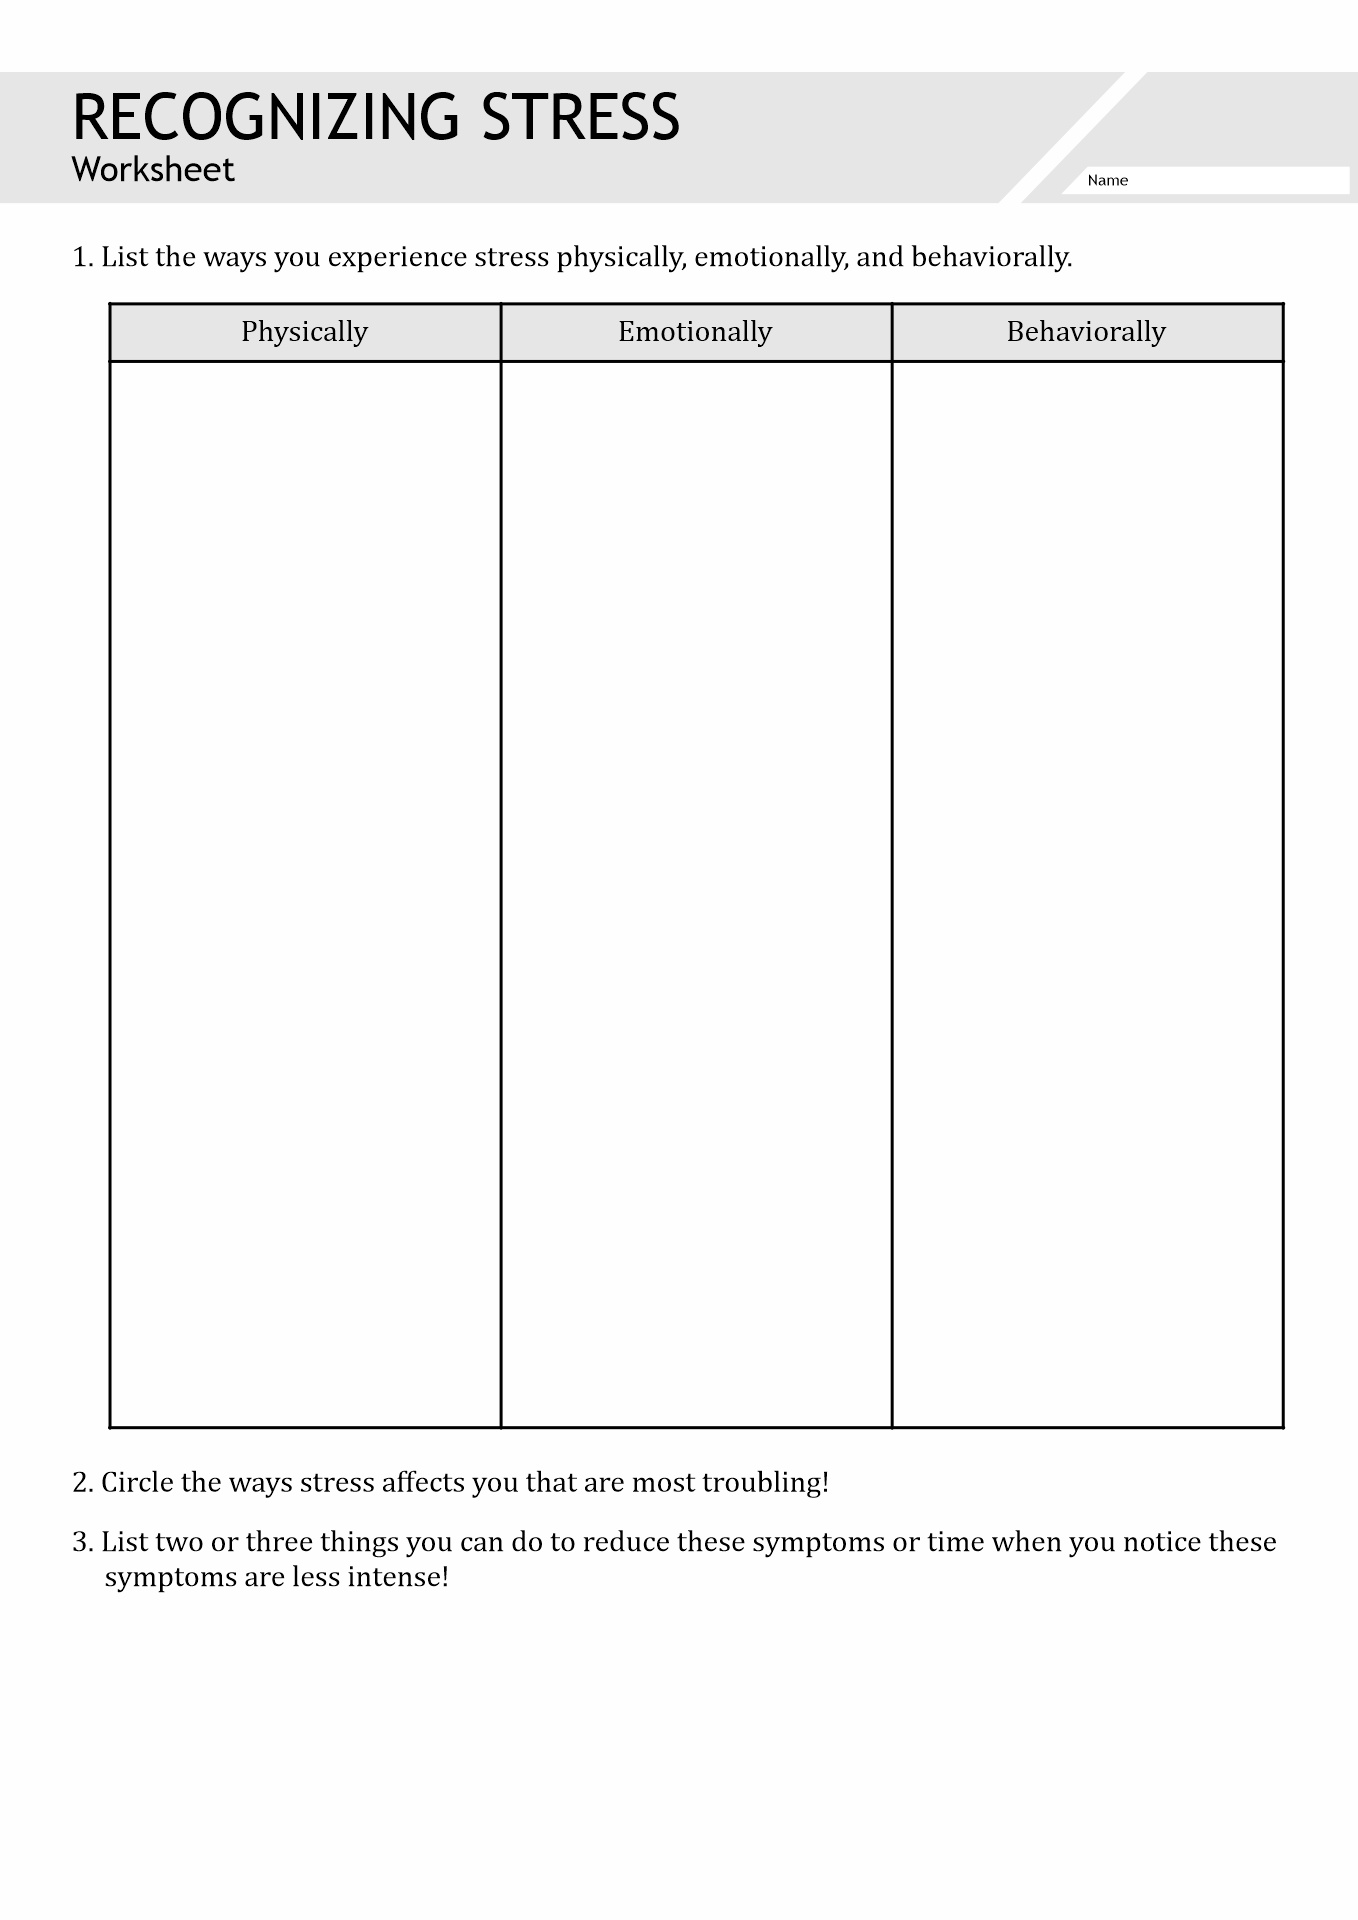 20-best-images-of-printable-substance-abuse-worksheets-substance-abuse-addiction-worksheet